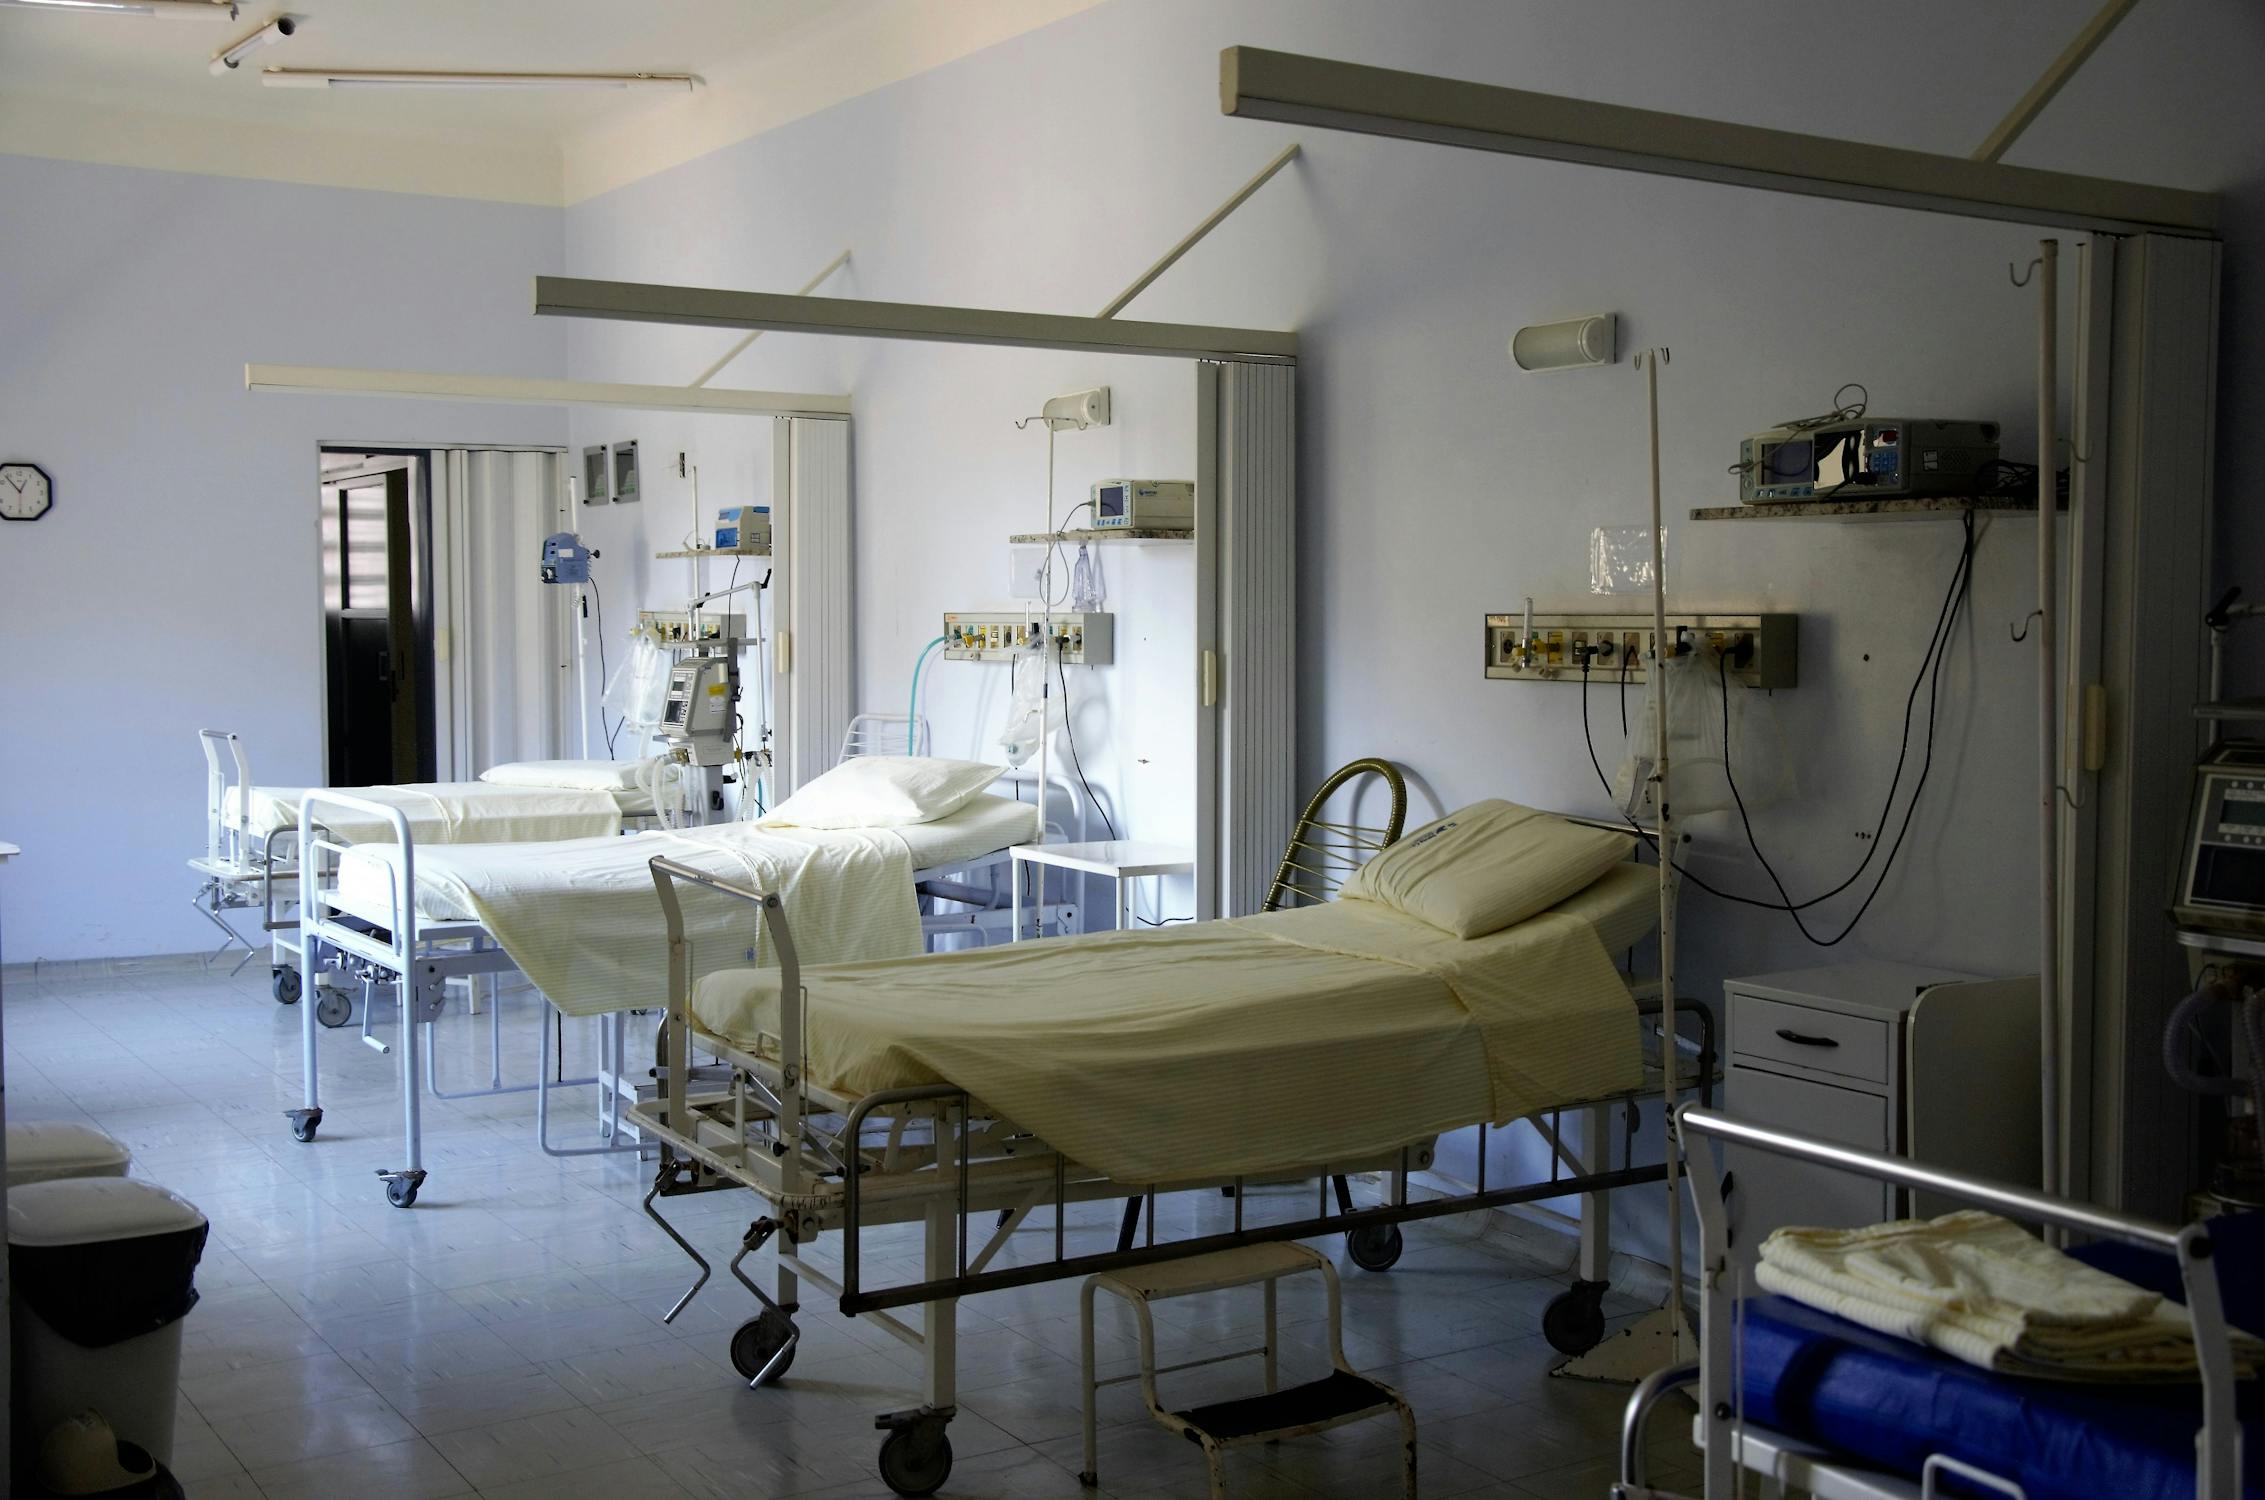 A picture of three hospital beds. Photo by pexels user Pixbay. Used courtesy of Pexels,com